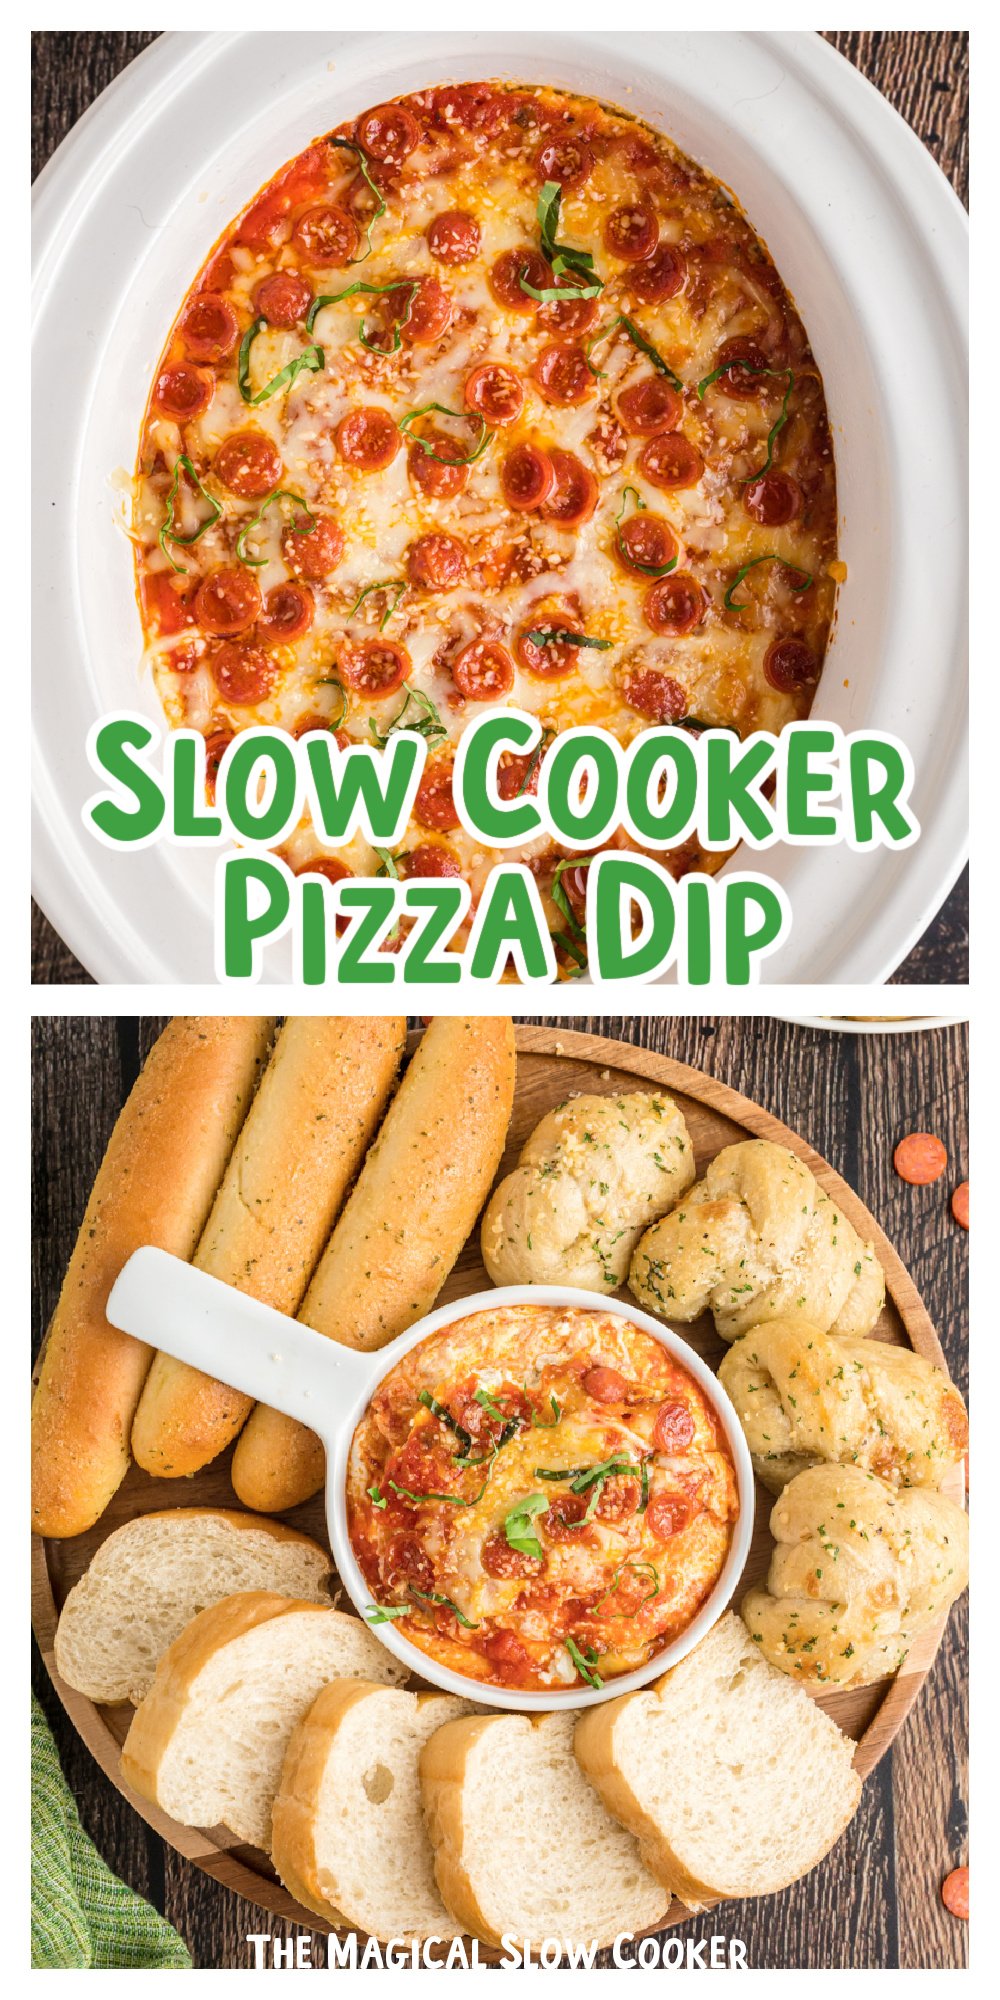 2 images of pizza dip with text overlay,